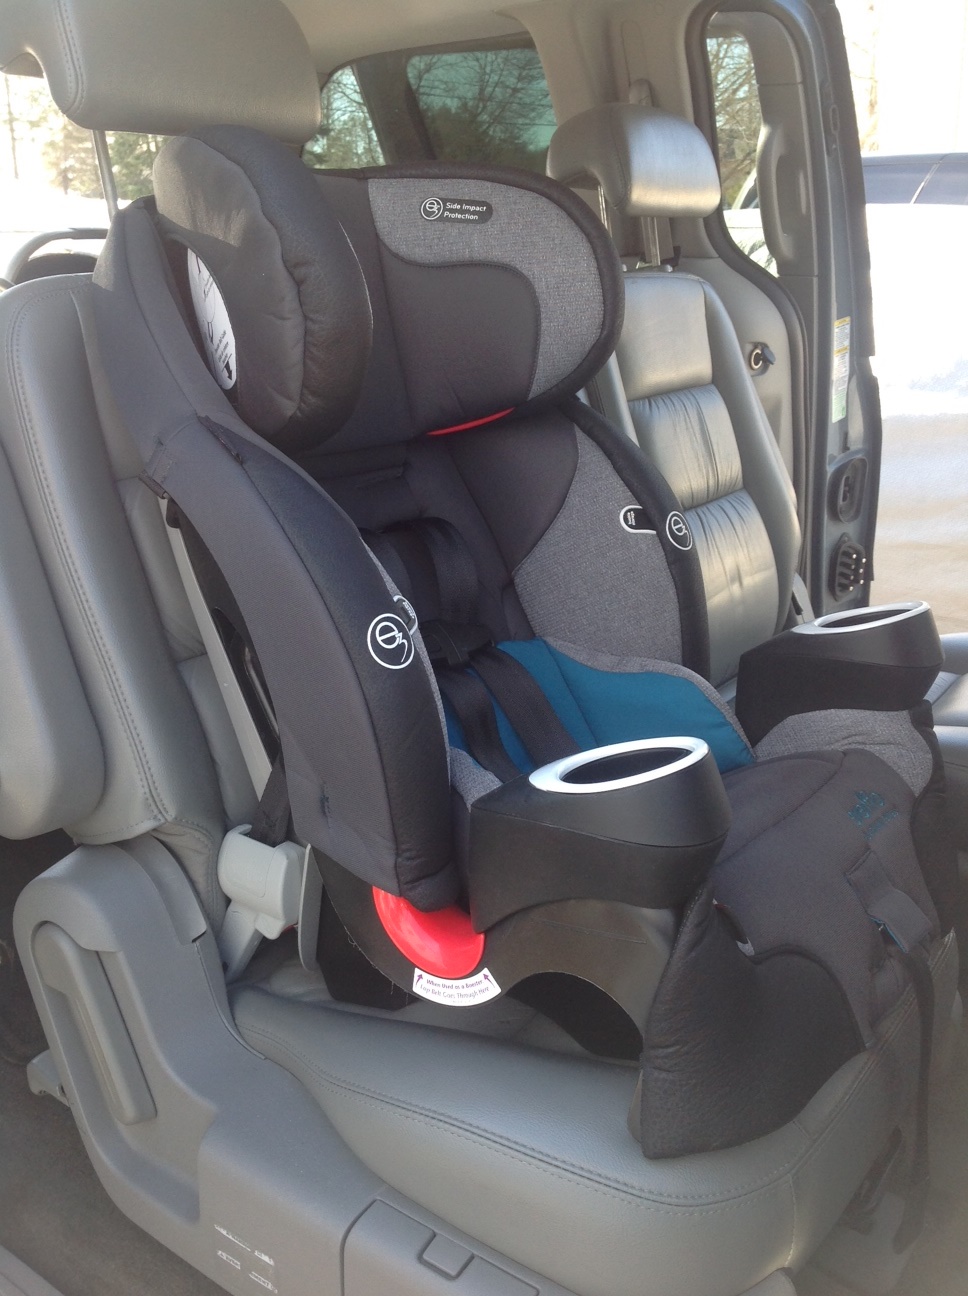 How do you find an Evenflo car seat manual?